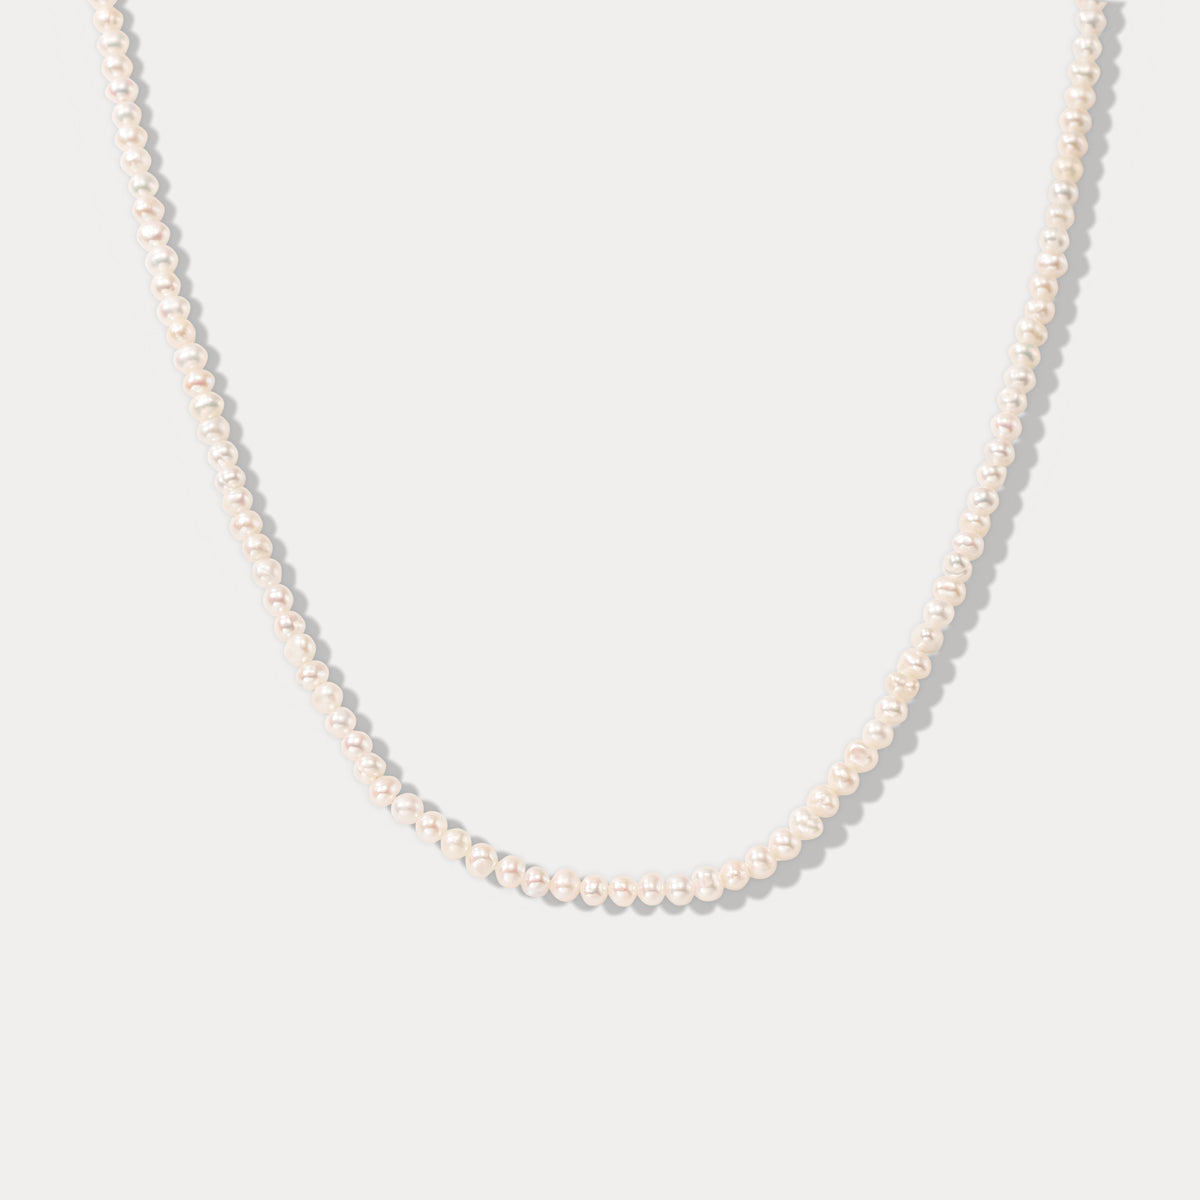 Selenichast simple pearl necklace